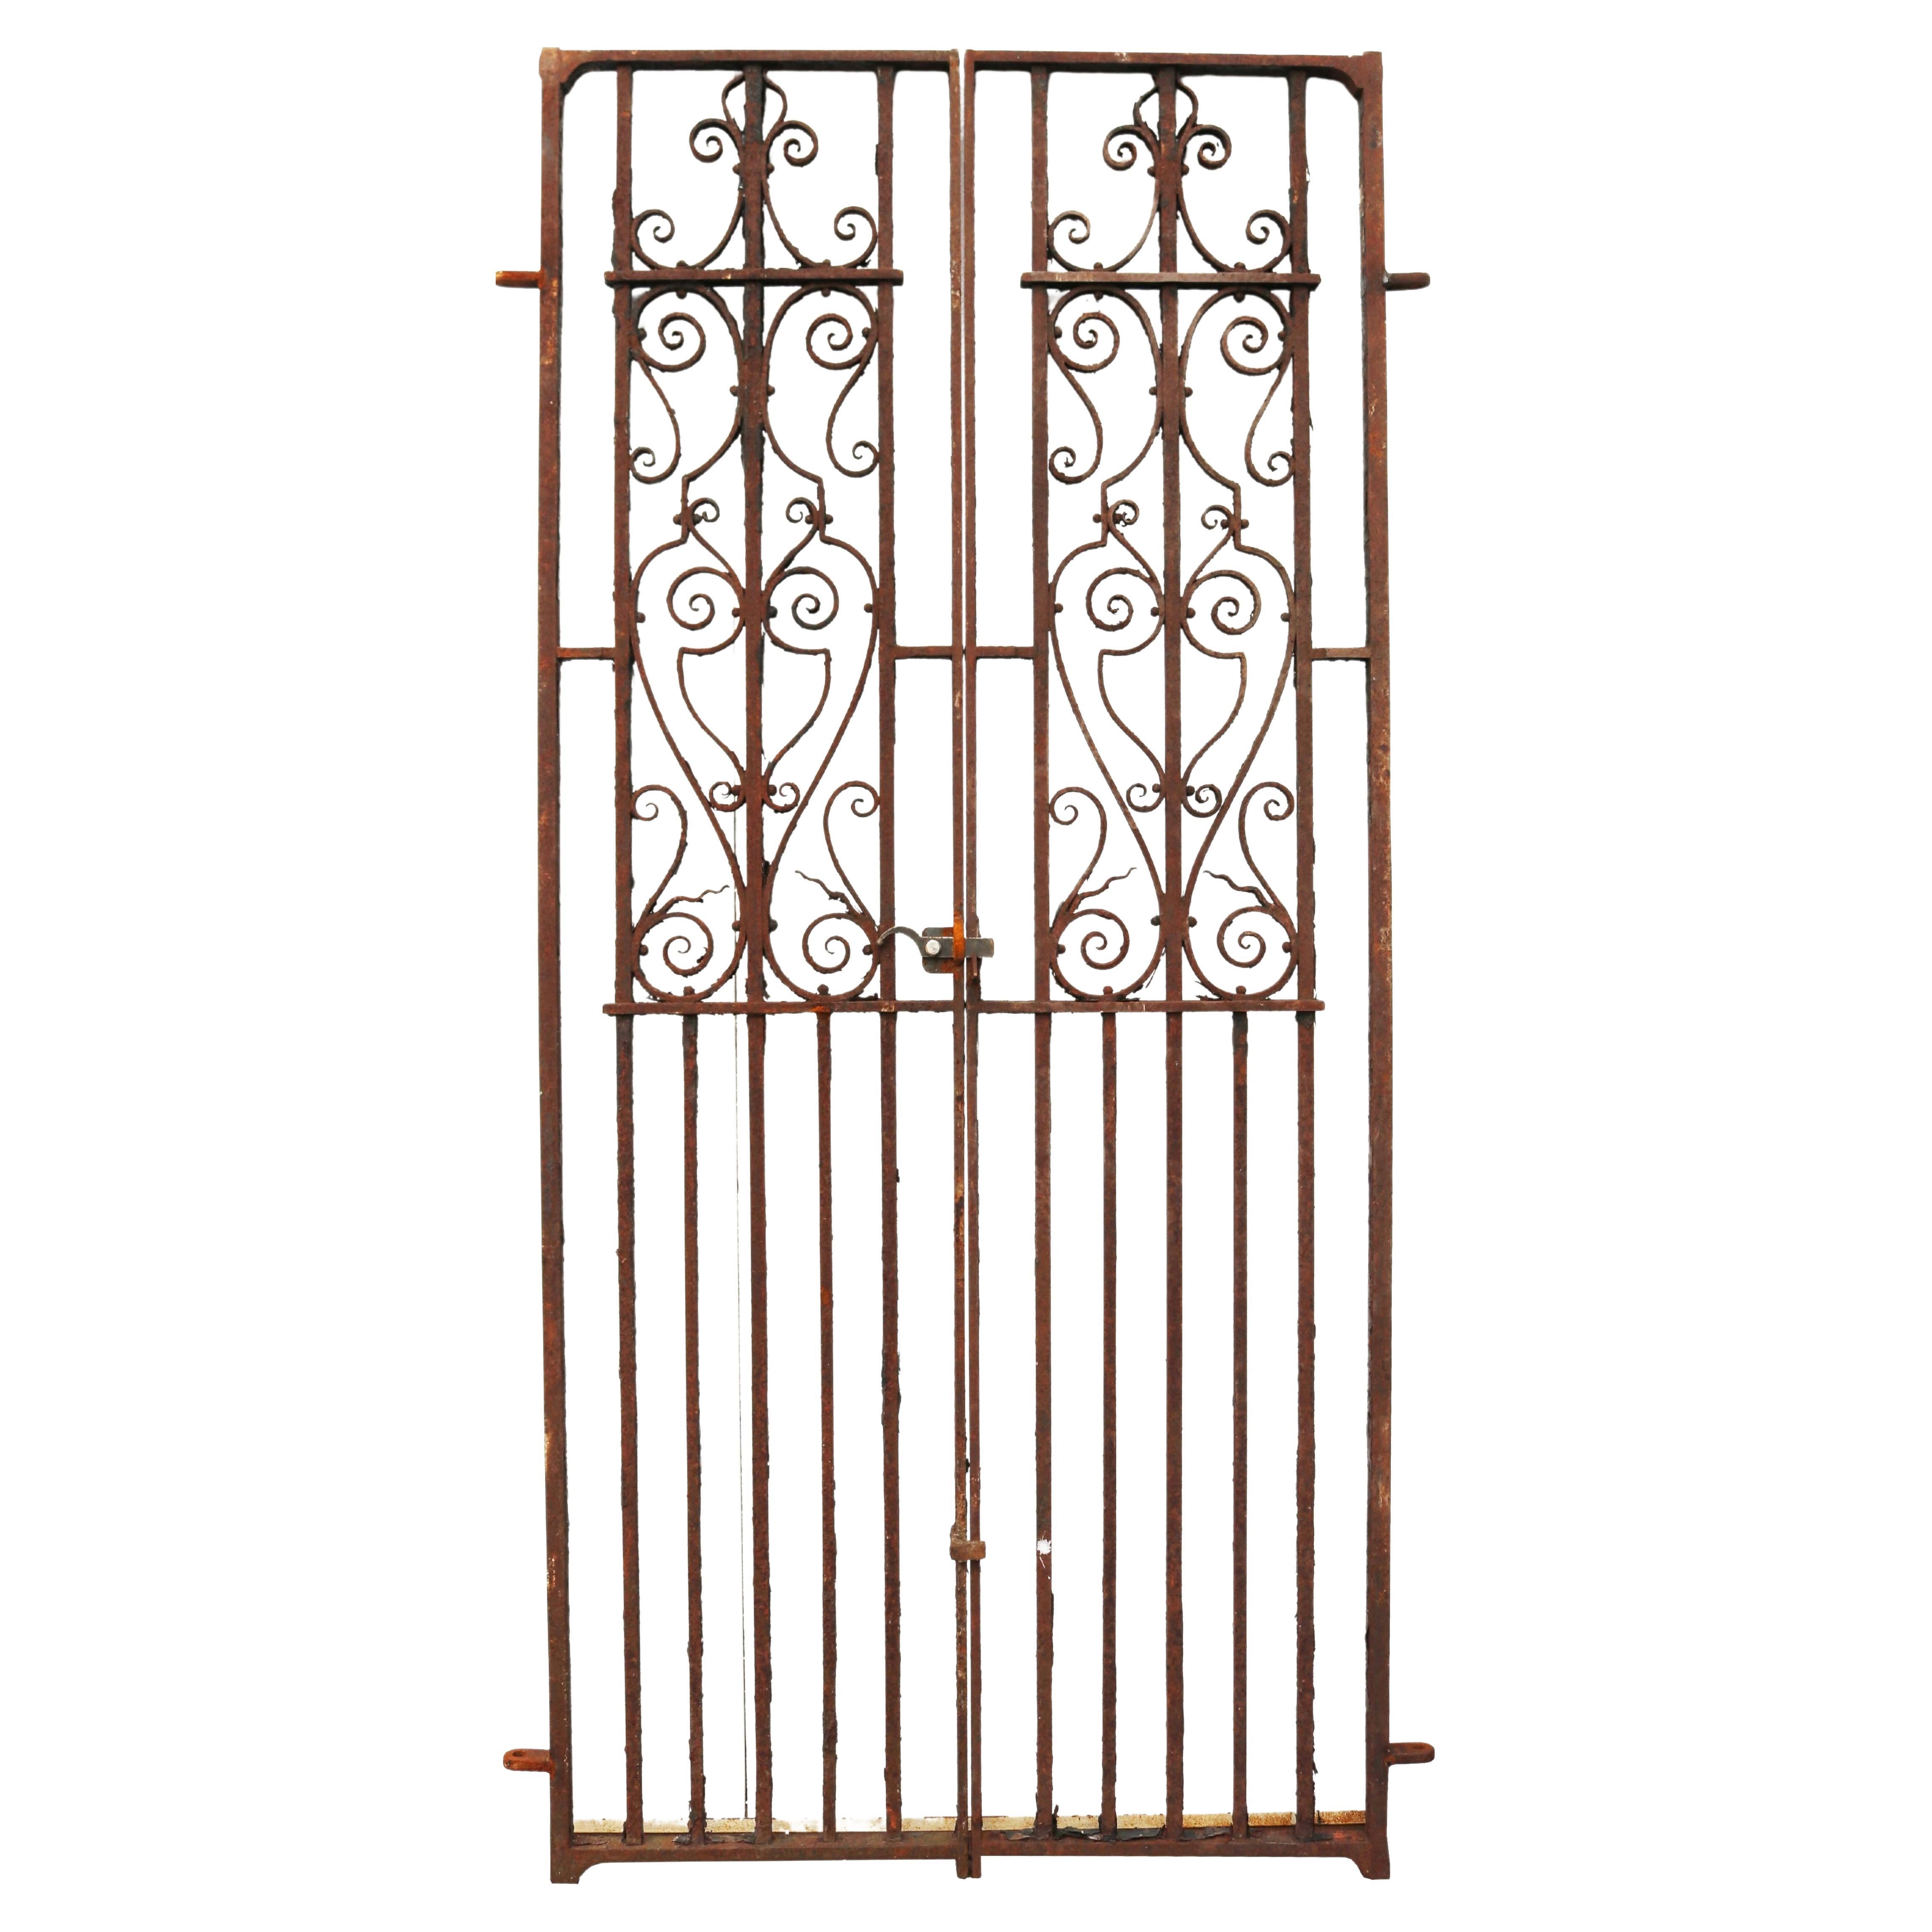 Pair of Tall Wrought Iron Gates